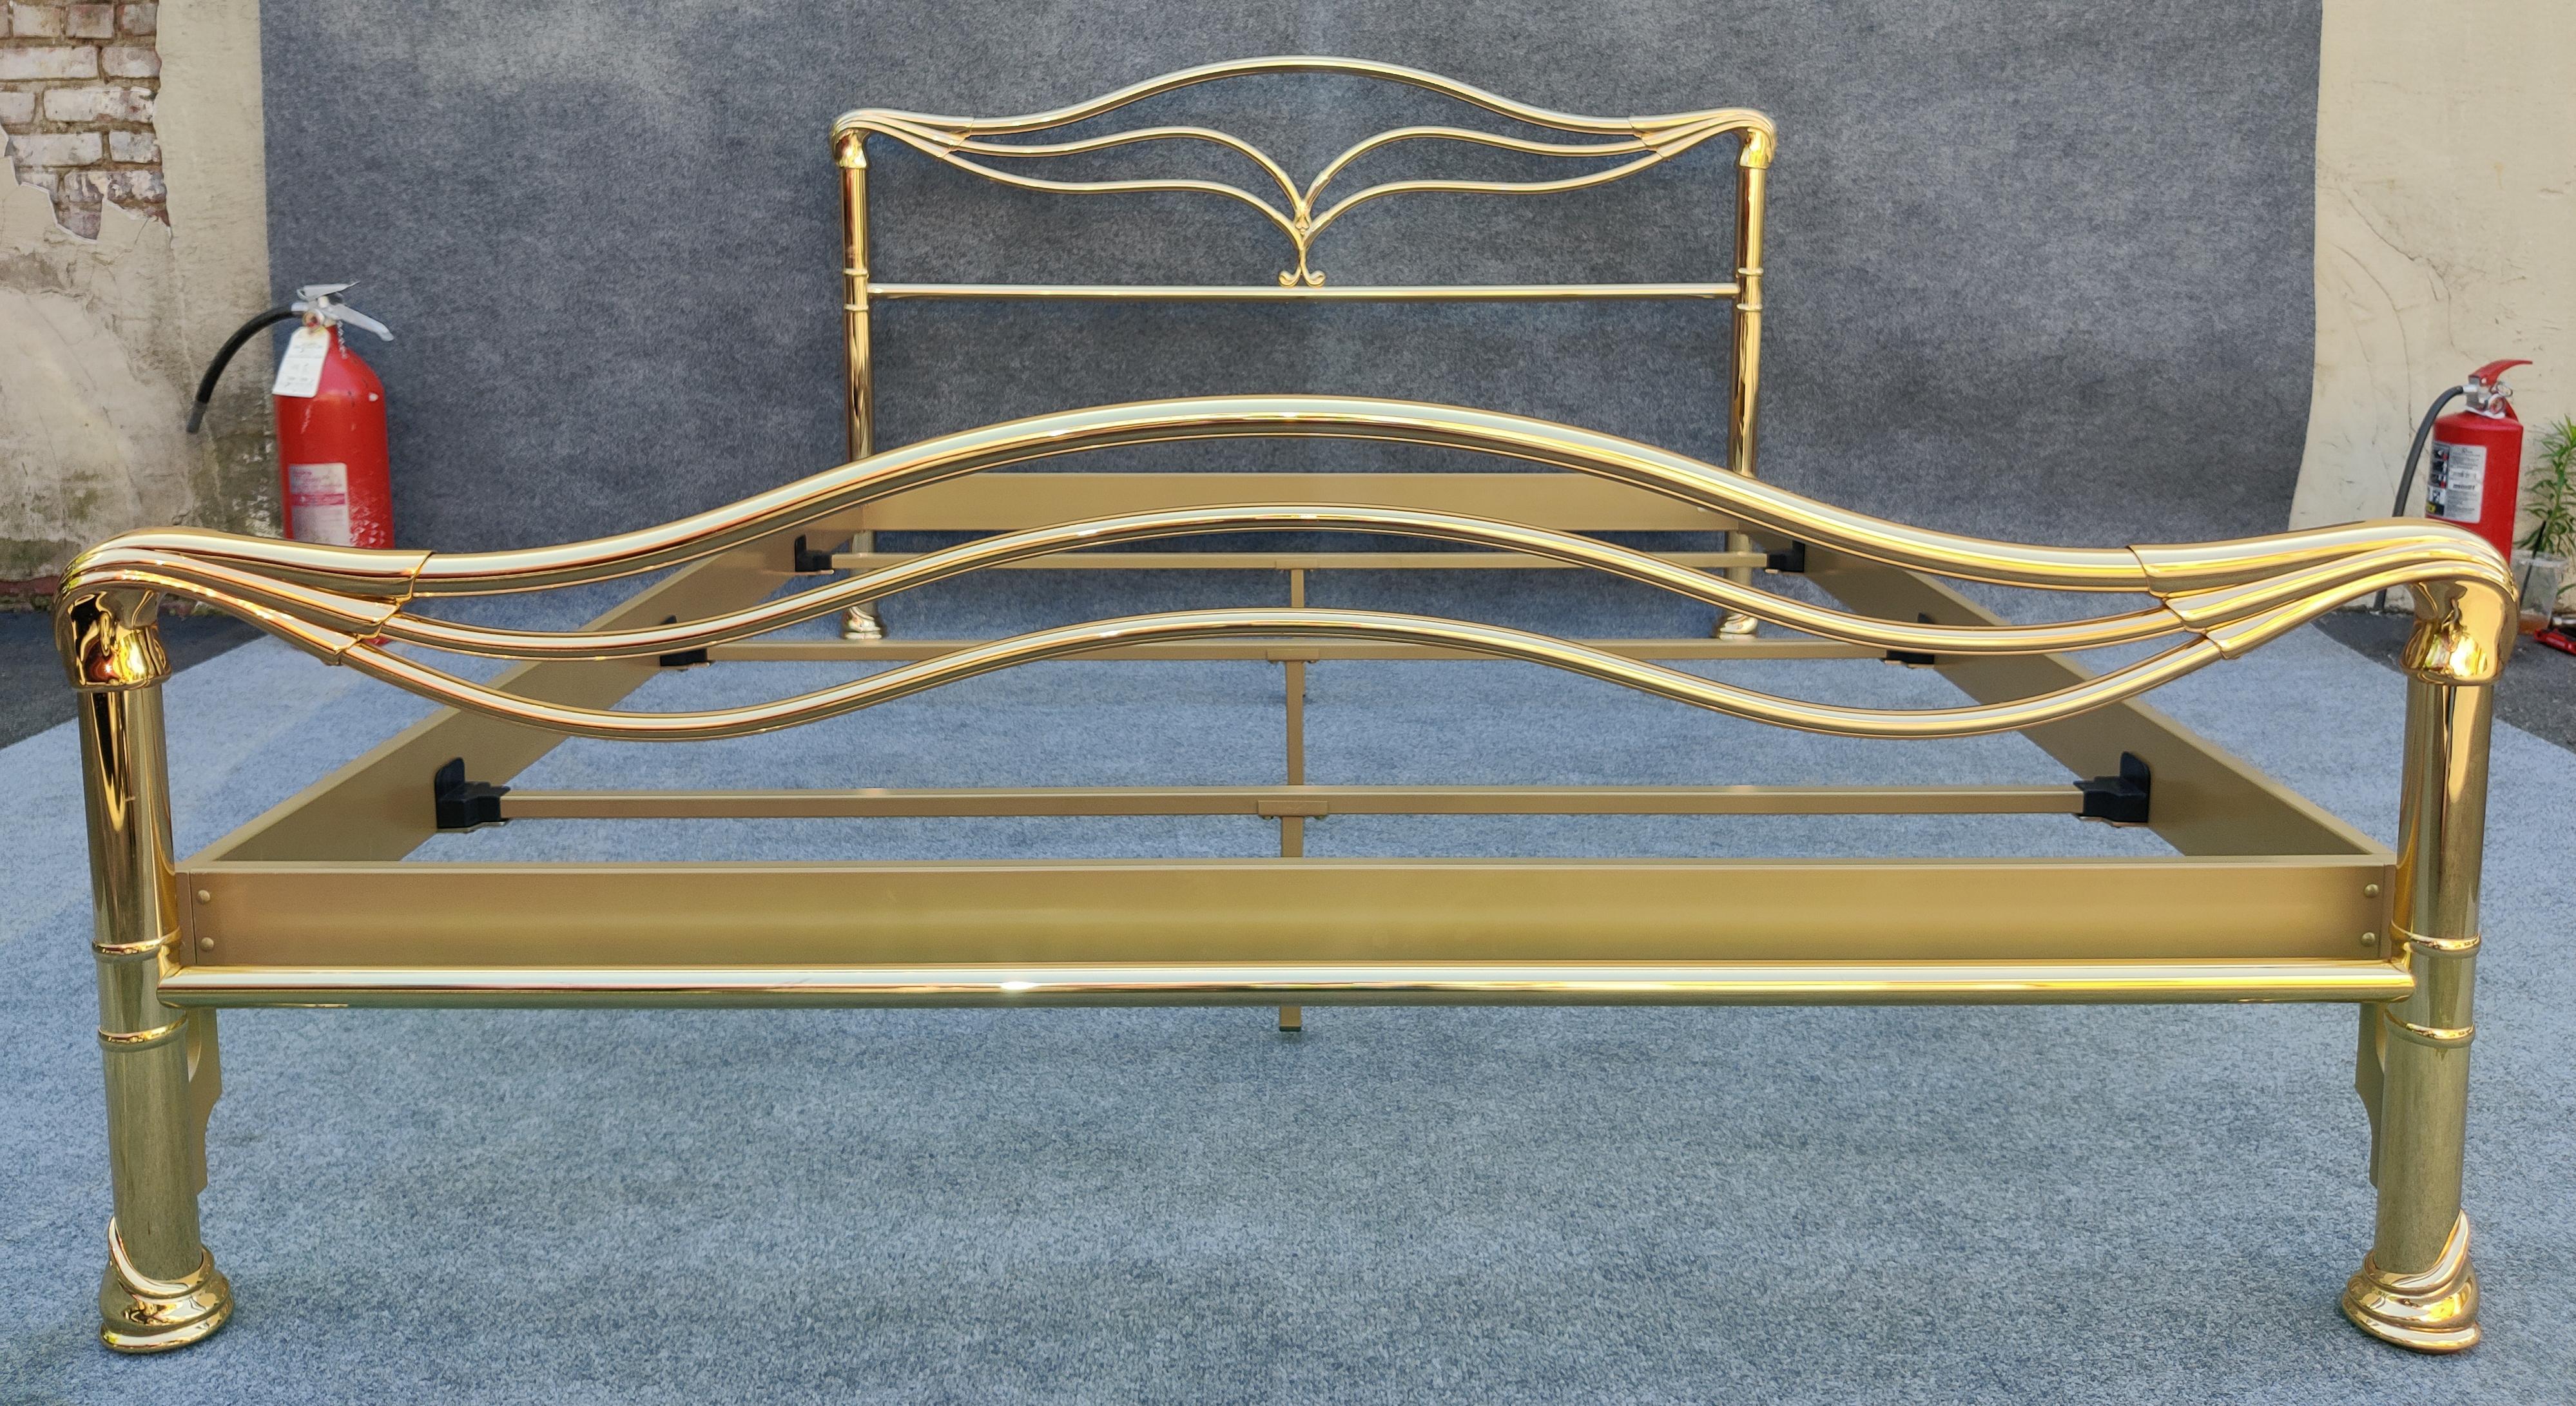 This rare brass bed was made in the 1970s by exclusive manufacturer Armoni Essebi in Italy. Little is known about the maker, other than that their beds were extremely high quality. Due to the limited number of beds, we have concluded that each bed